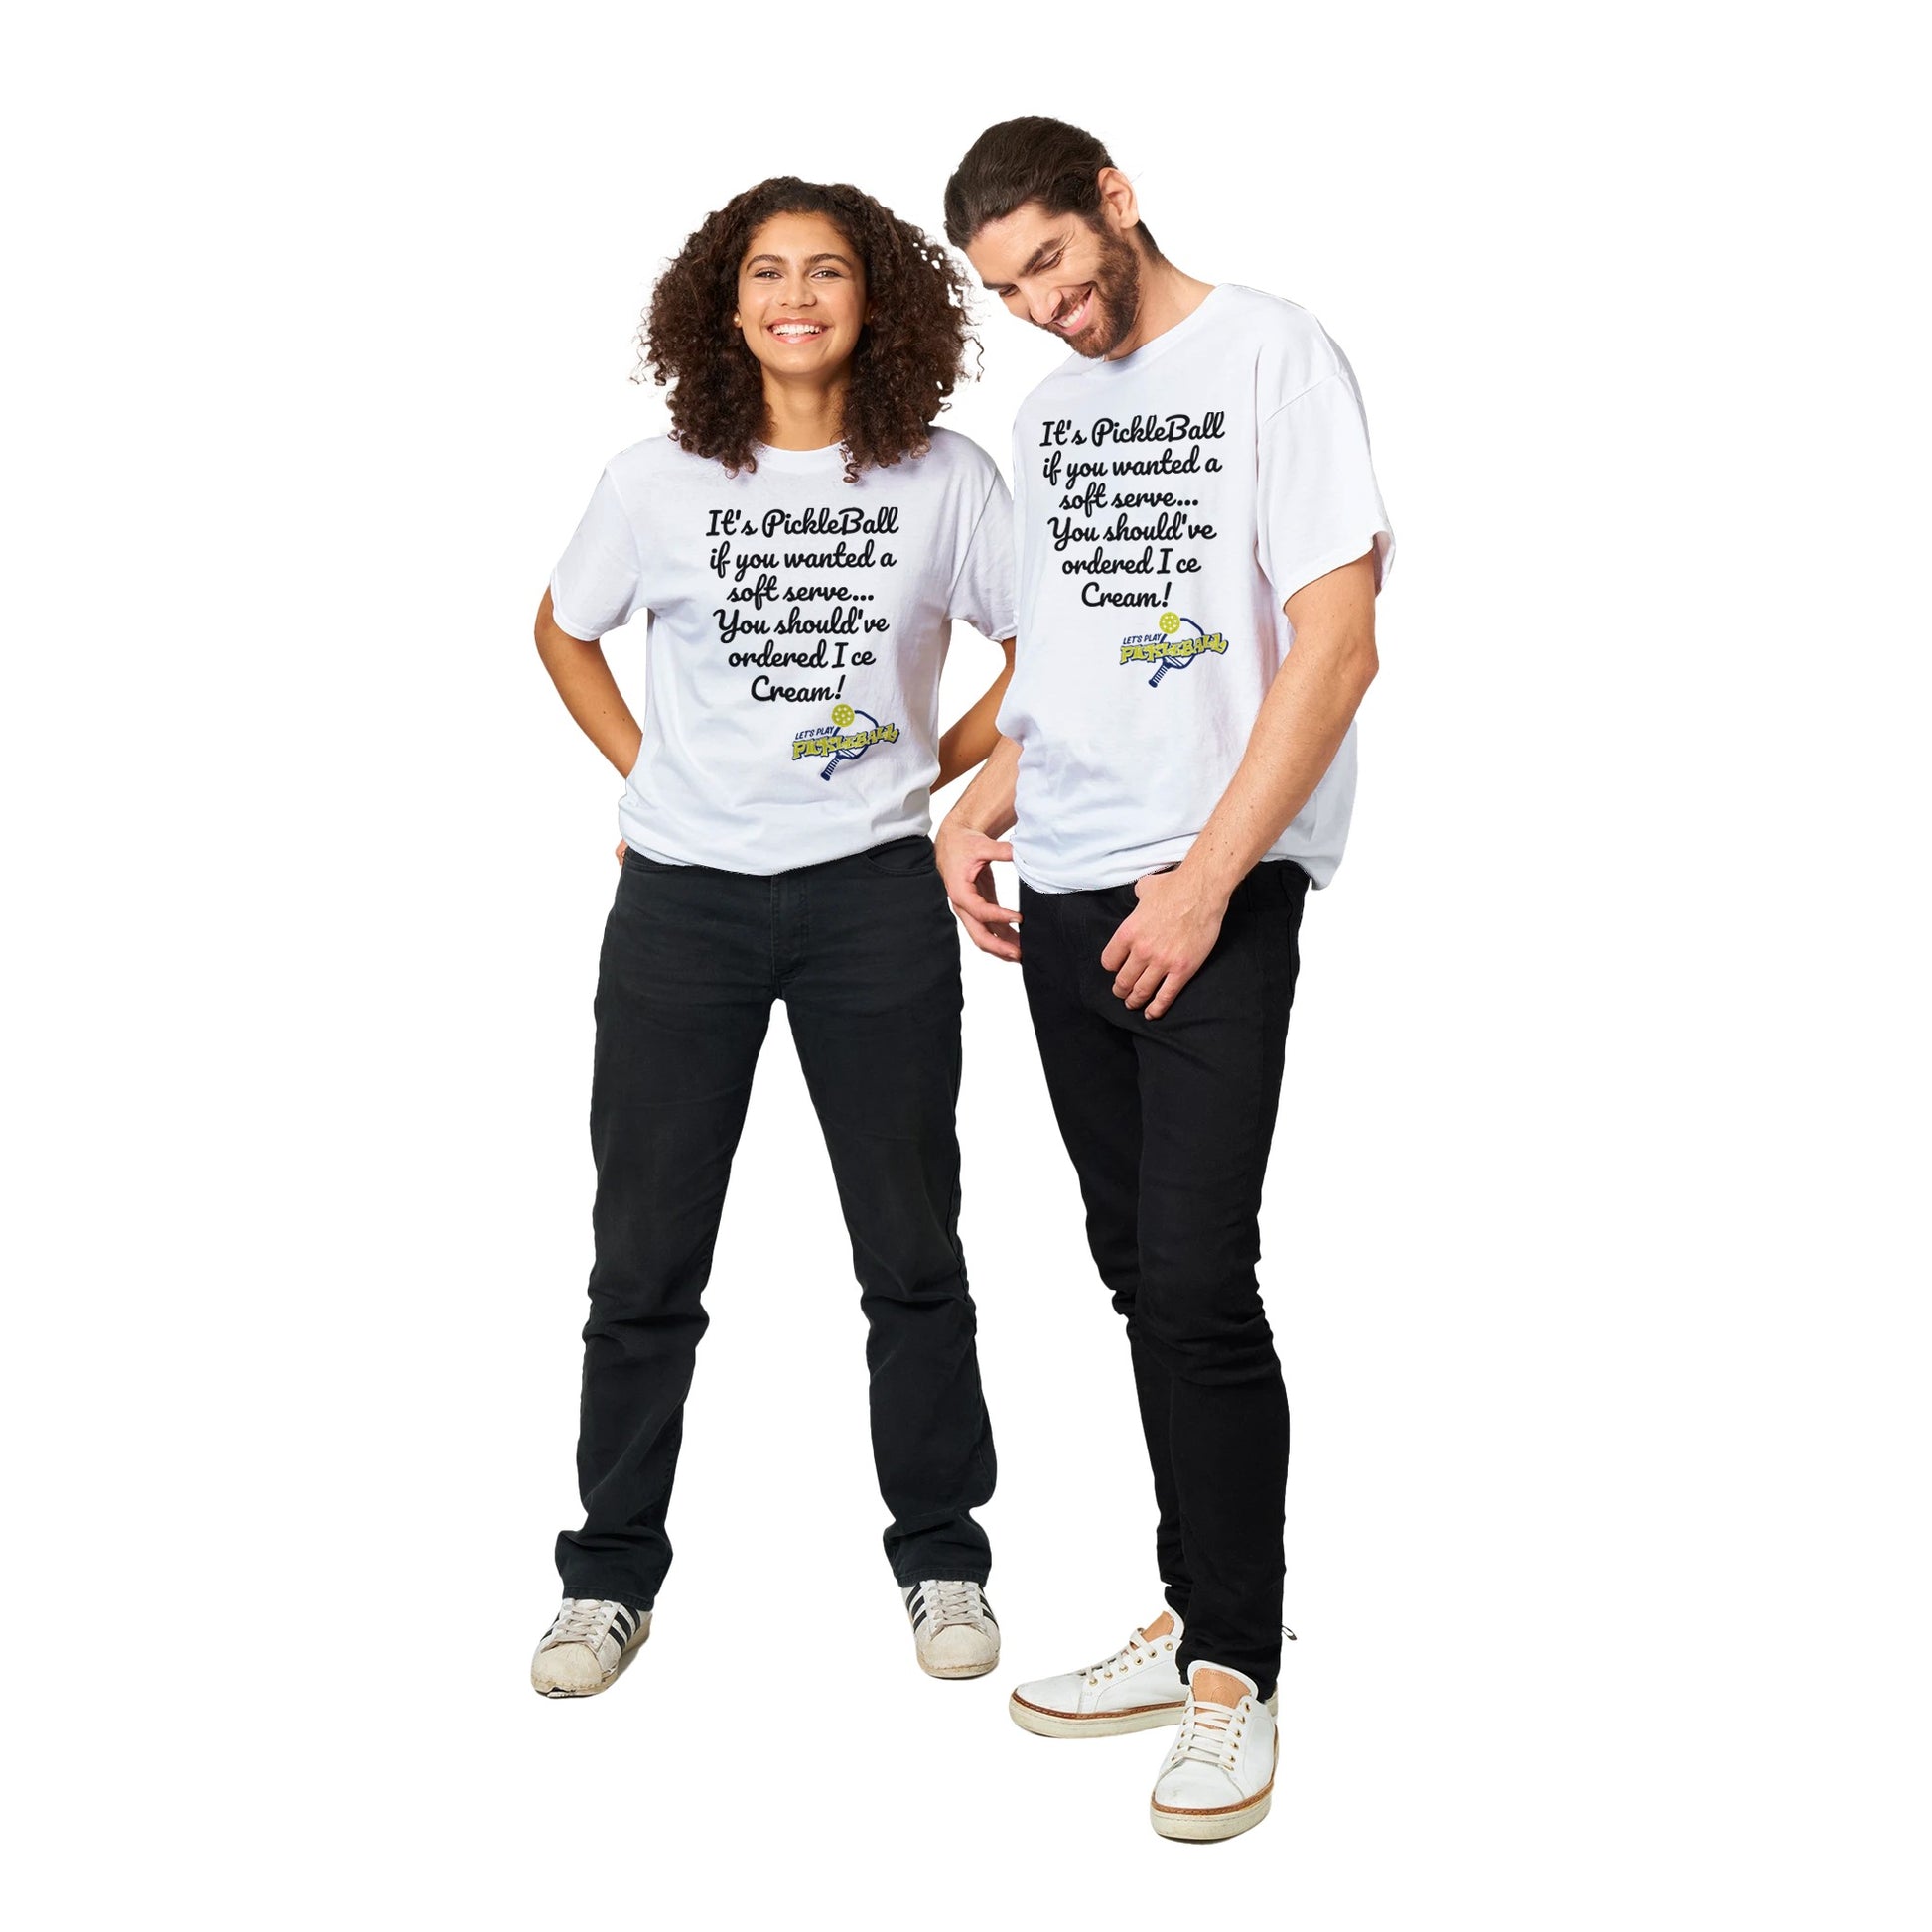 A white comfortable Unisex Crewneck heavyweight cotton t-shirt with funny saying It’s PickleBall if you wanted a soft serve… You should’ve ordered Ice Cream! and Let’s Play Pickleball logo on the front from WhatYa Say Apparel worn by Happy woman and man couple standing side by side.